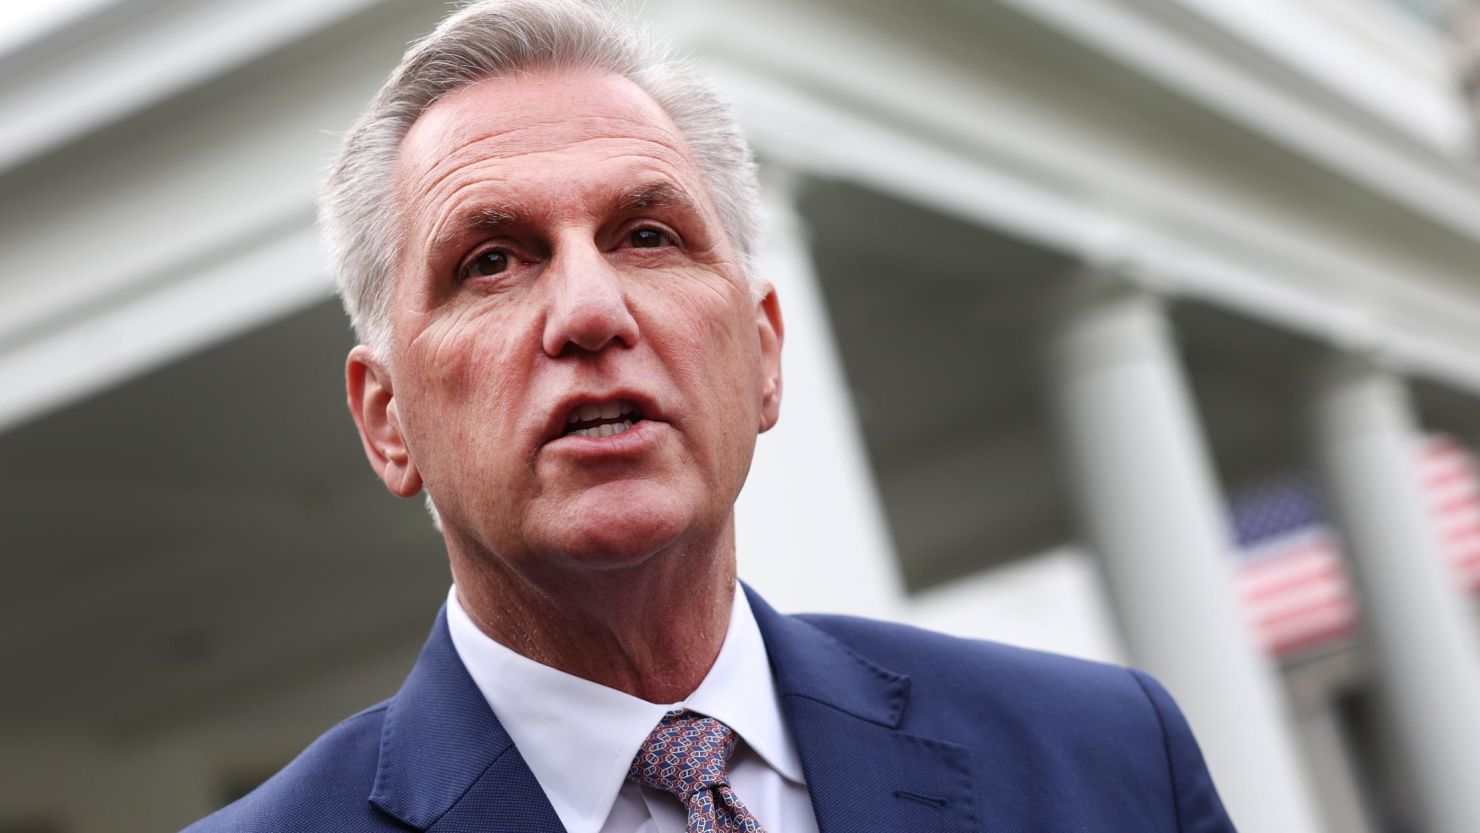 House Republican Leader Kevin McCarthy (R-CA) speaks to the media following a meeting with President Joe Biden at the White House on November 29, 2022.